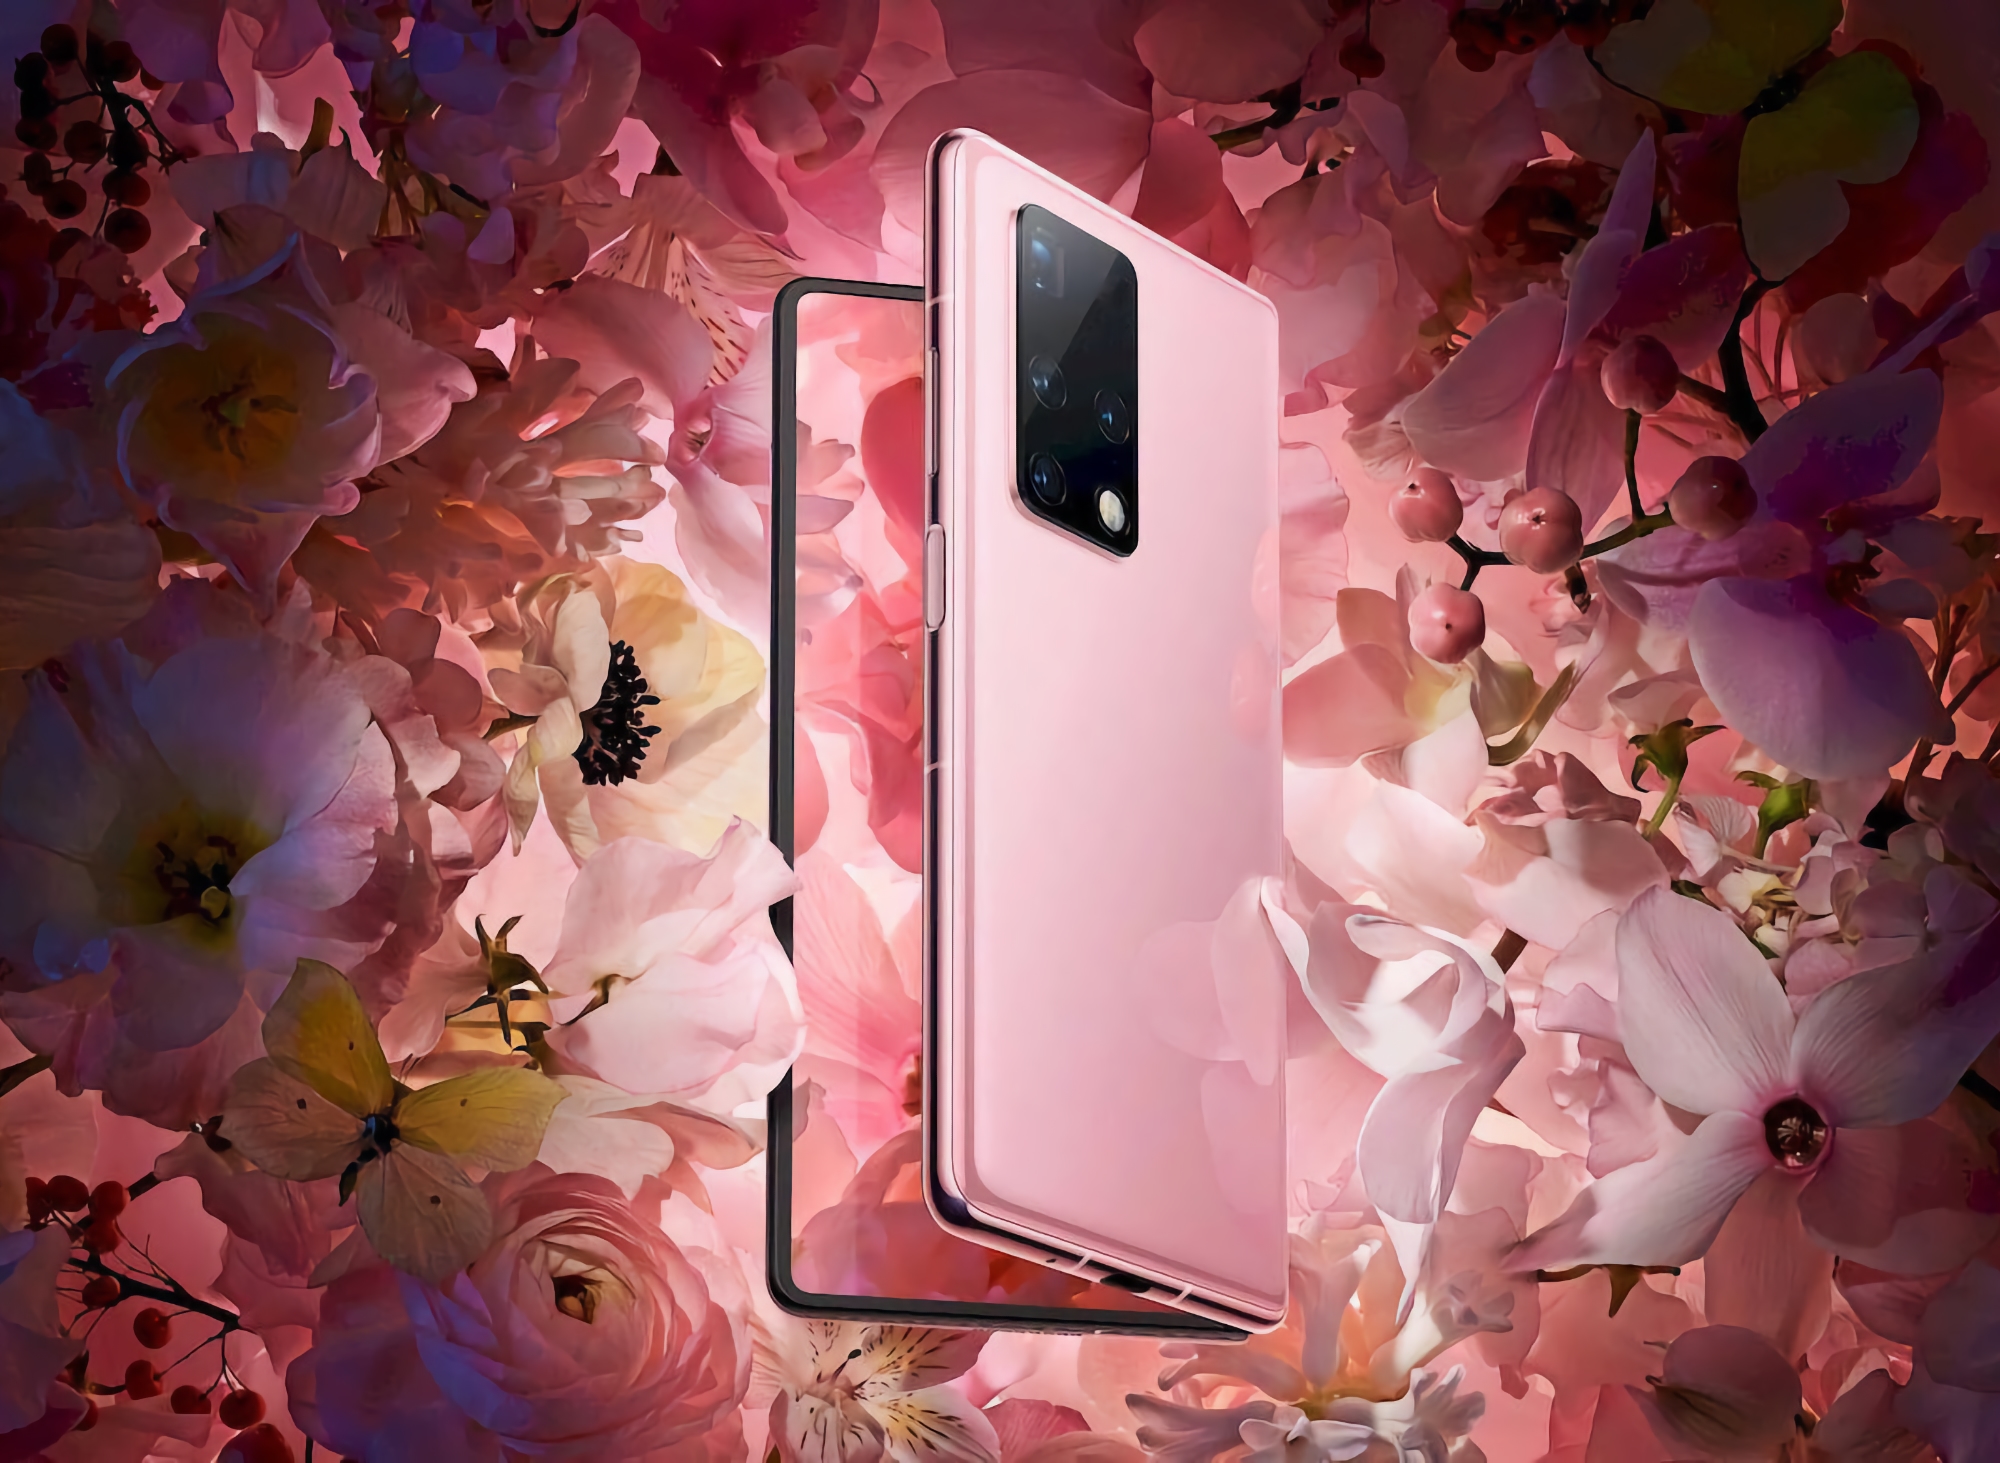 An insider told when Honor will release competitors Galaxy Z Fold 3 and Galaxy Z Flip 3